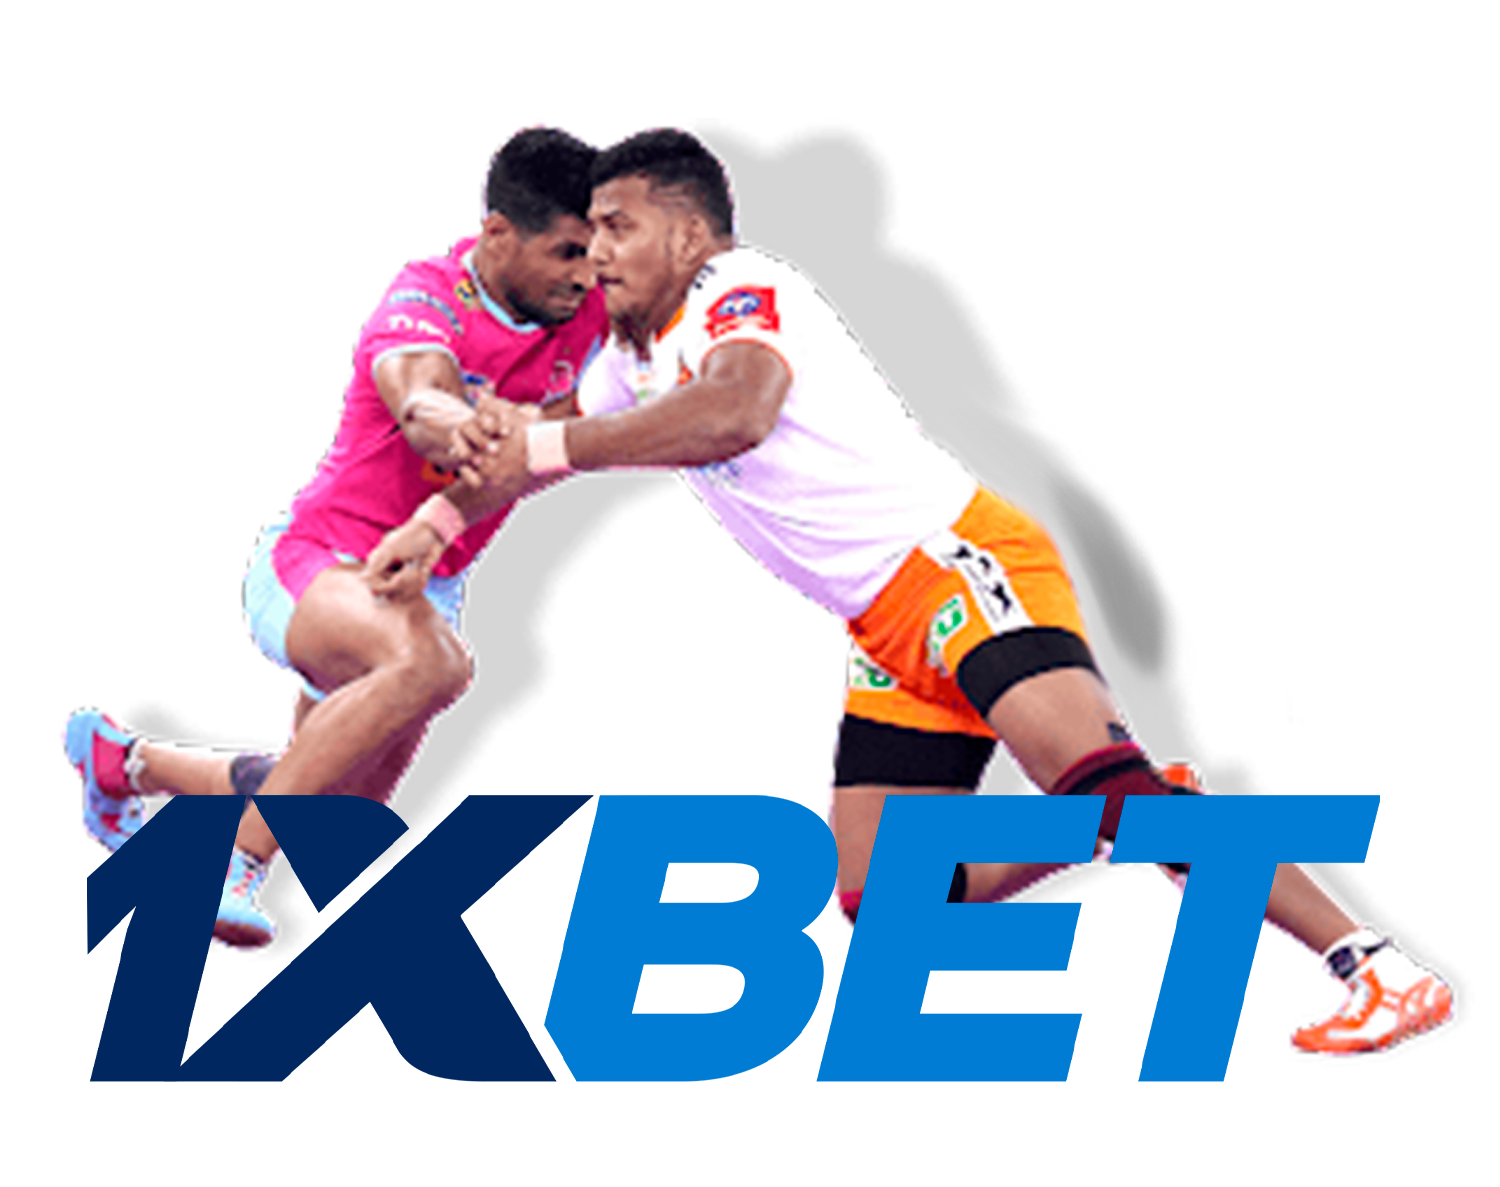 Bet on kabaddi easily in the 1xbet sportsbook.